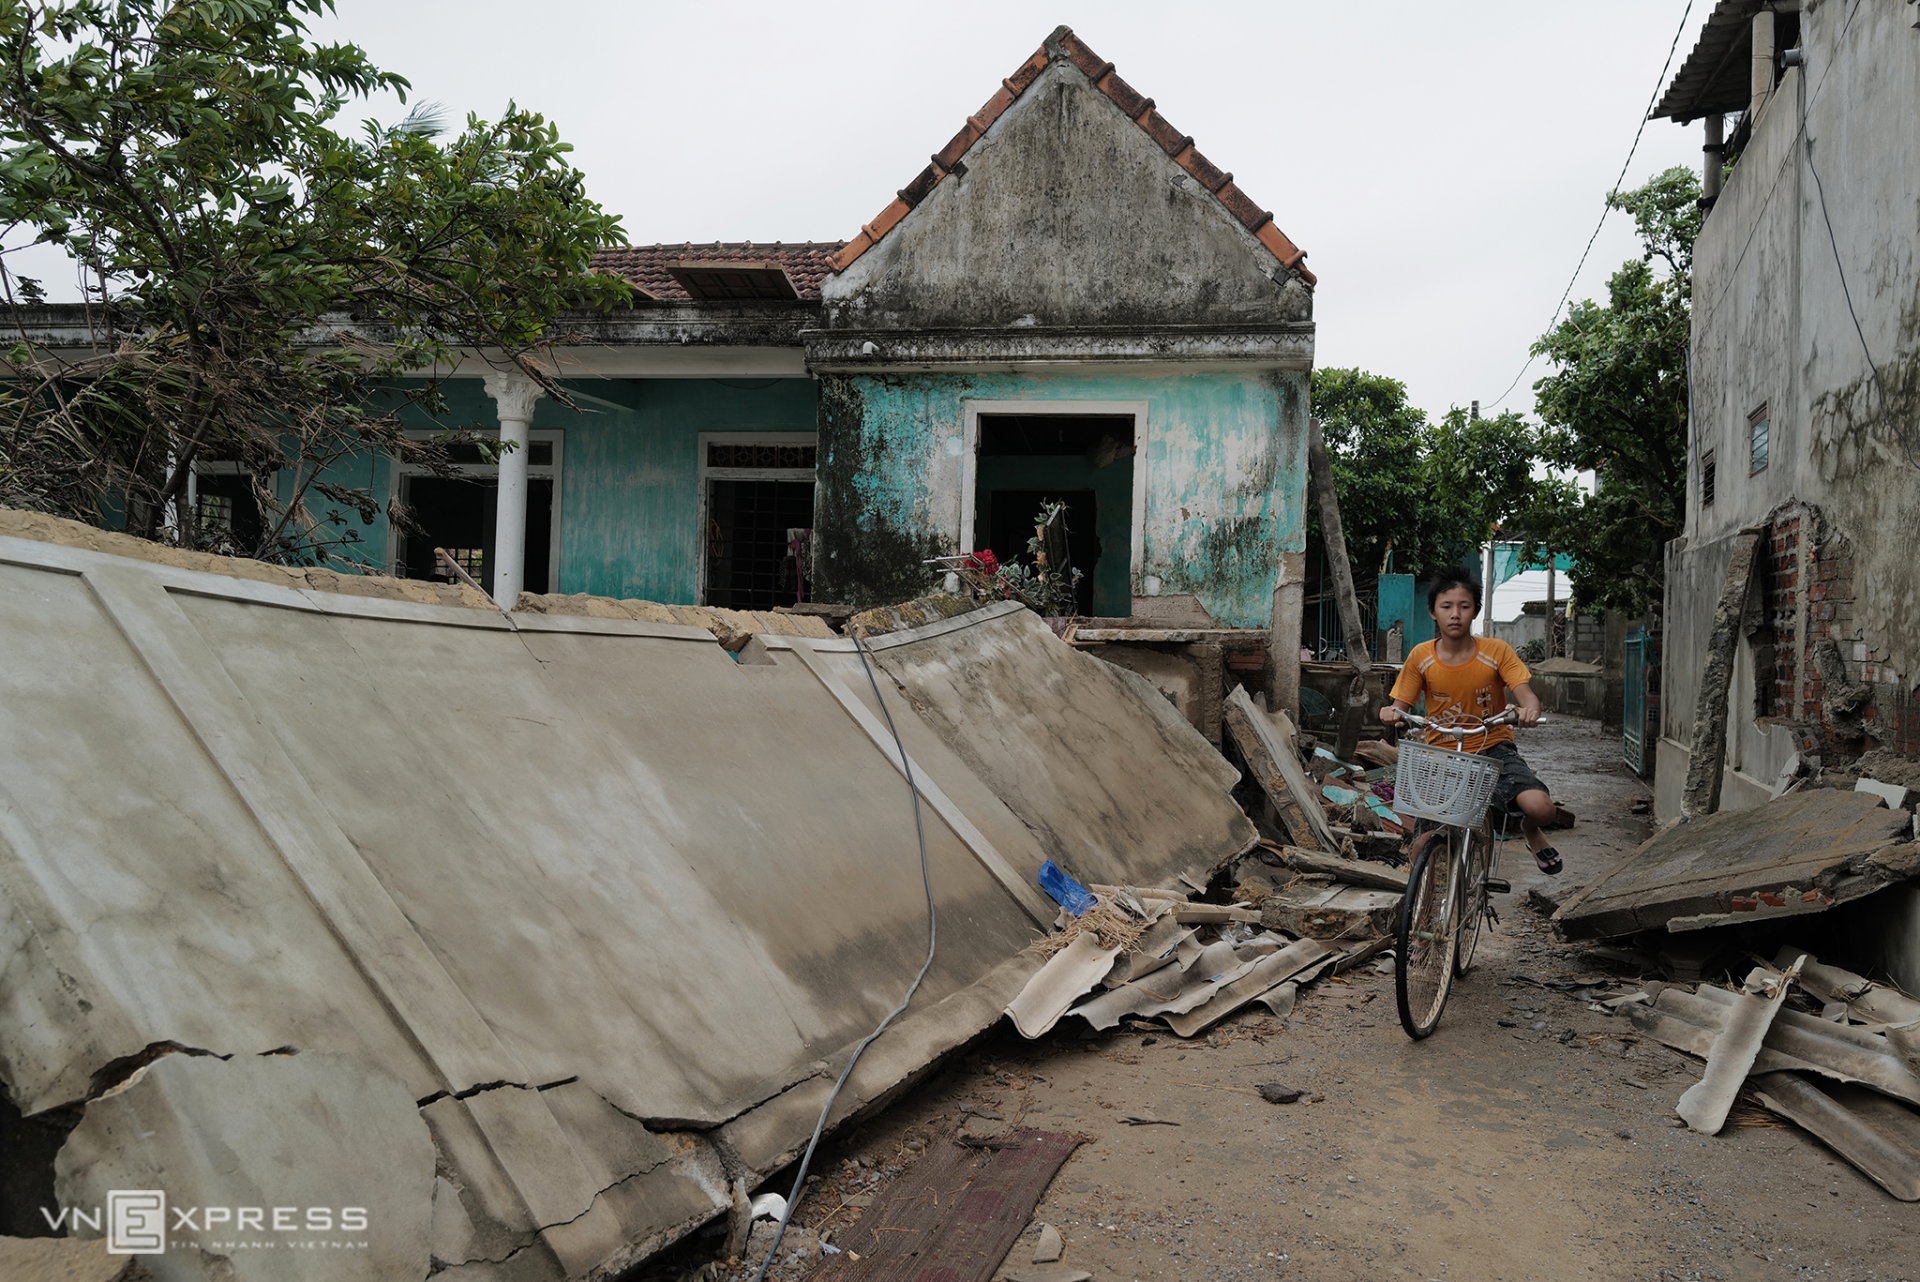 In photos: Quang Binh left ravaged after record flooding